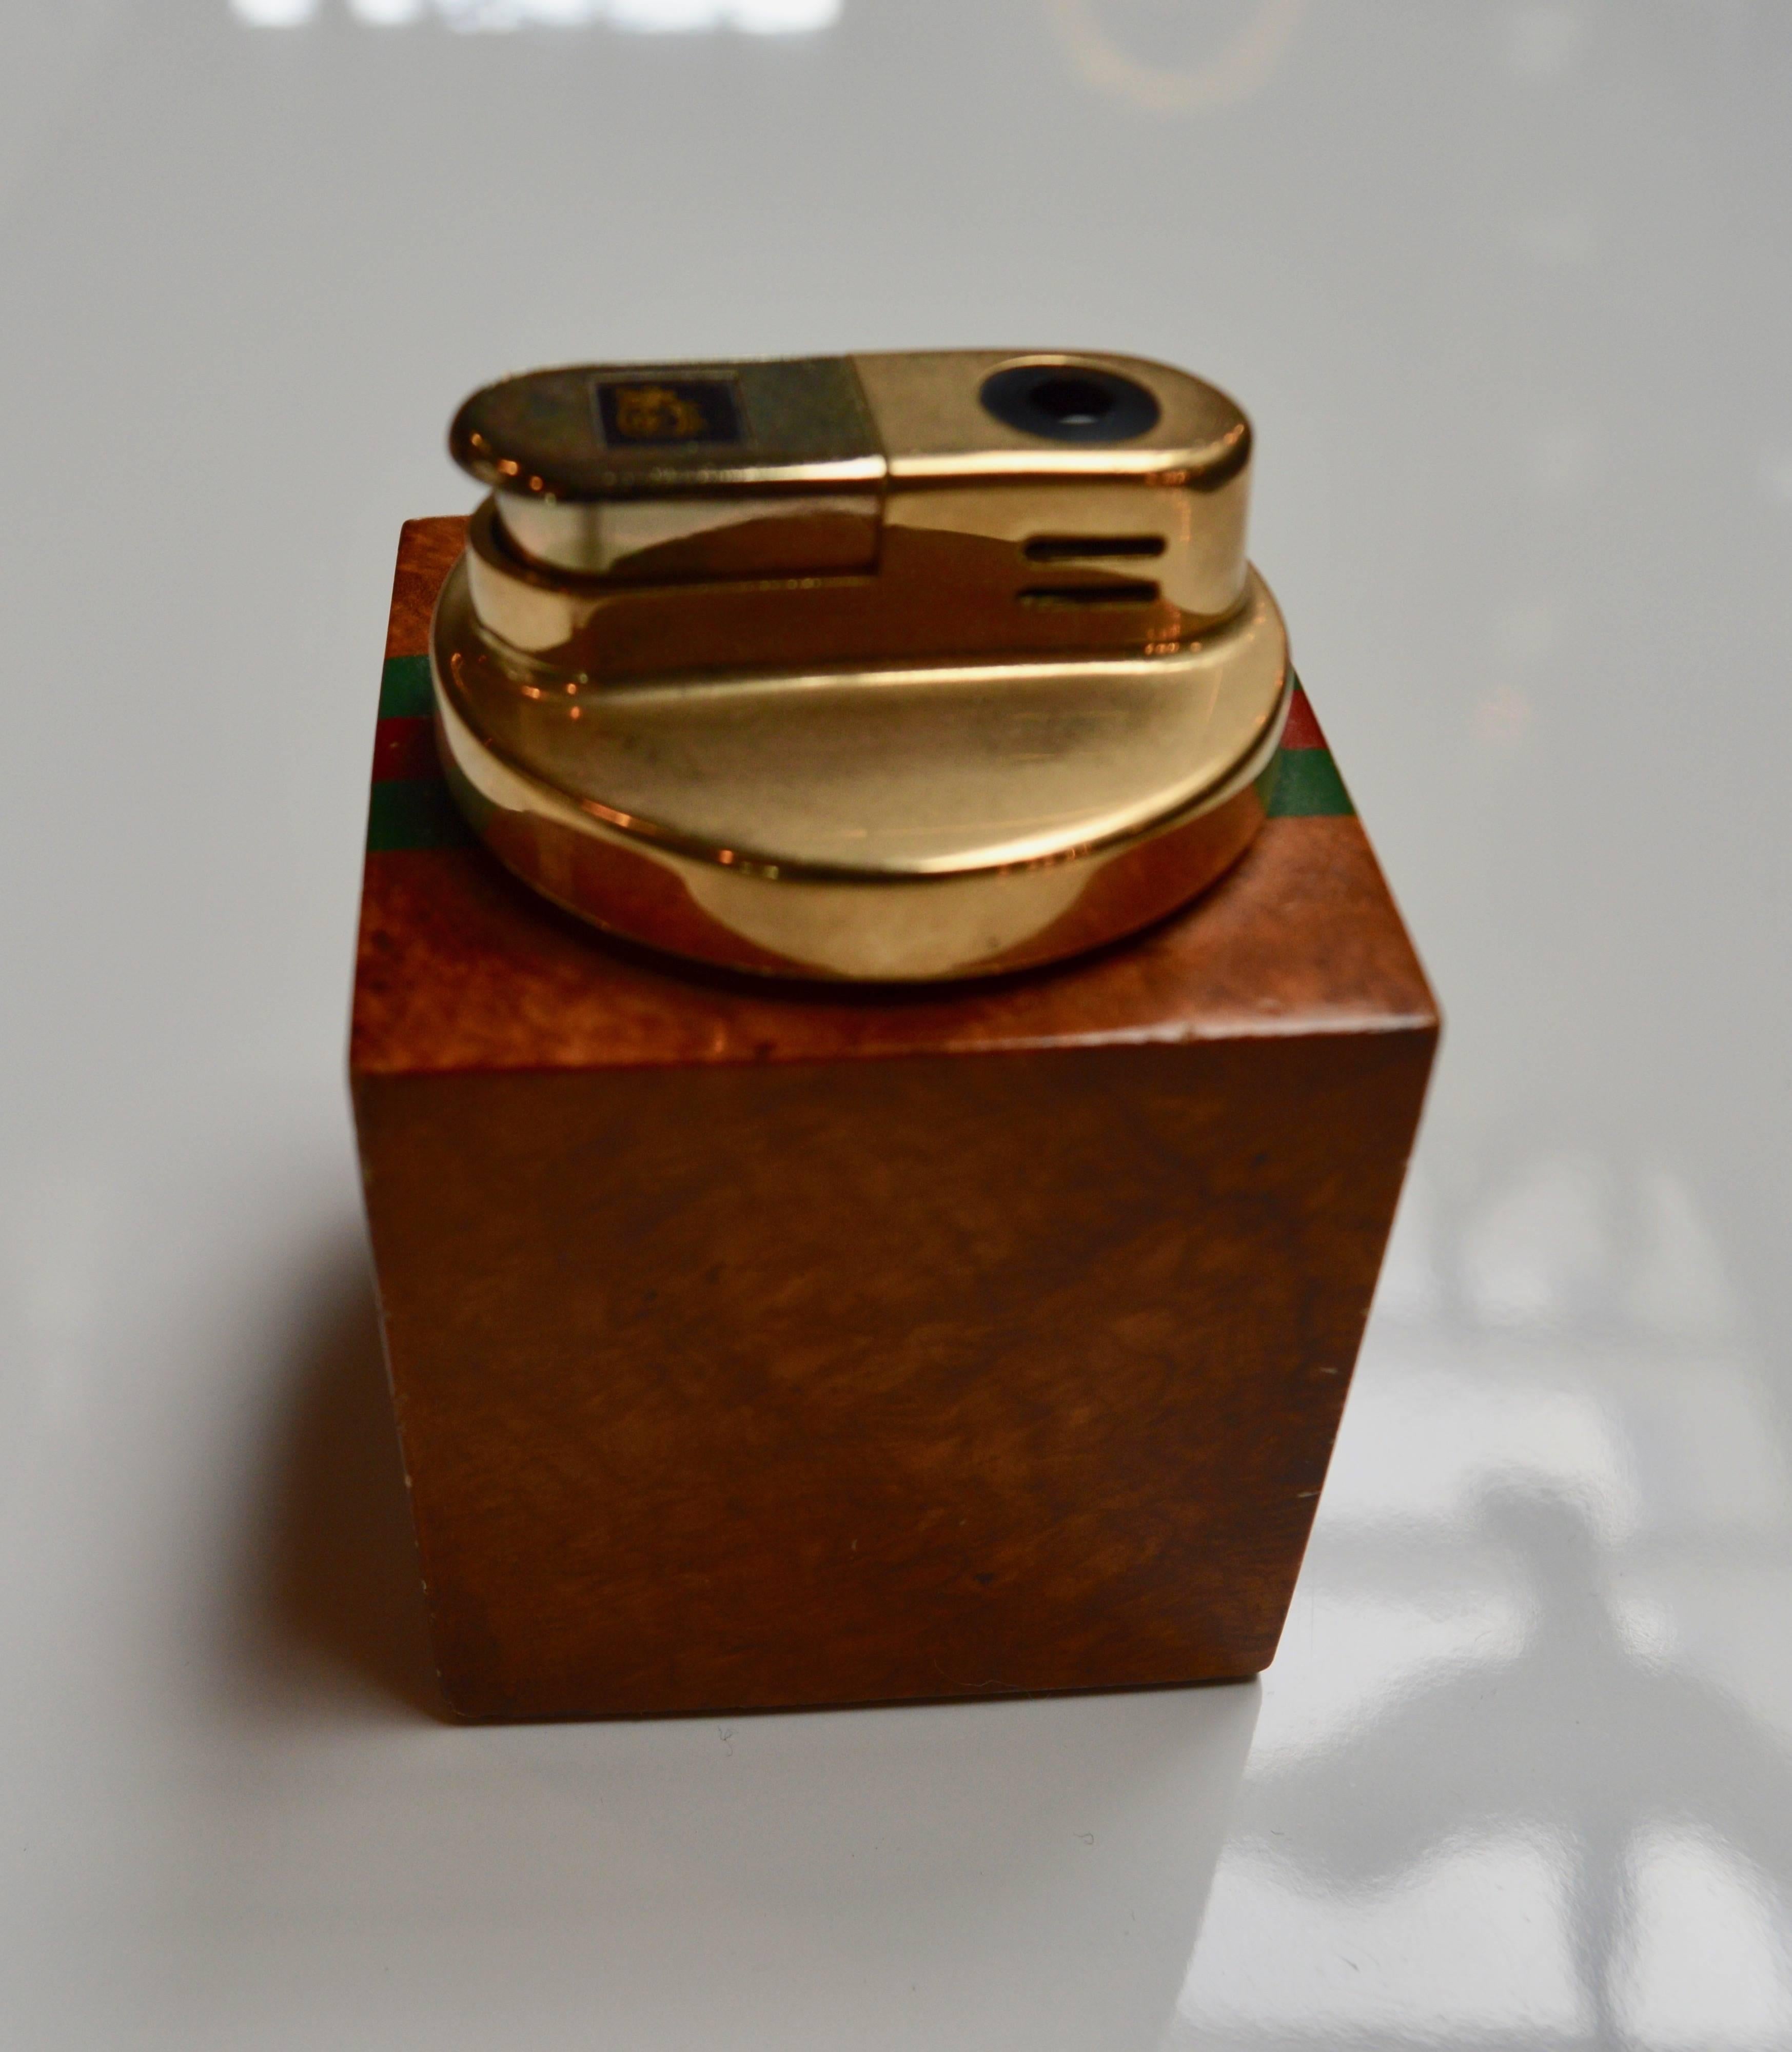 Beautiful matching lighter and ashtray set by Gucci. Large heavy burl wood frame with faceted inset glass ashtray. Signature Gucci stripes on both sides as well as signature GG patterned logo underneath. Lighter is Burl wood with Gucci stripes on